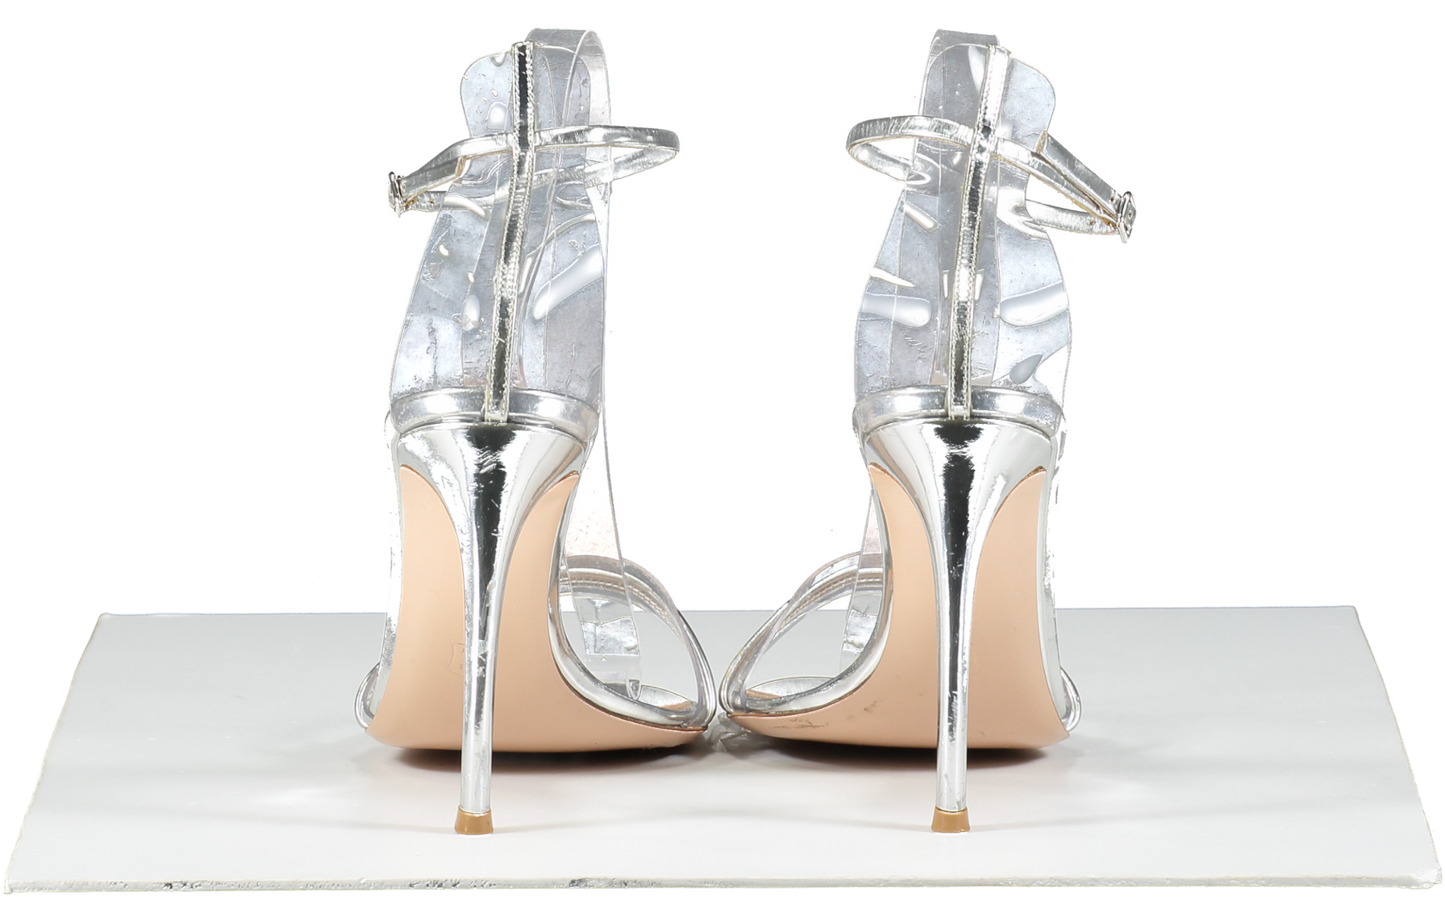 Gianvito Rossi Metallic Silver Leather And Pvc Heeled Sandals UK 6 EU 39 👠